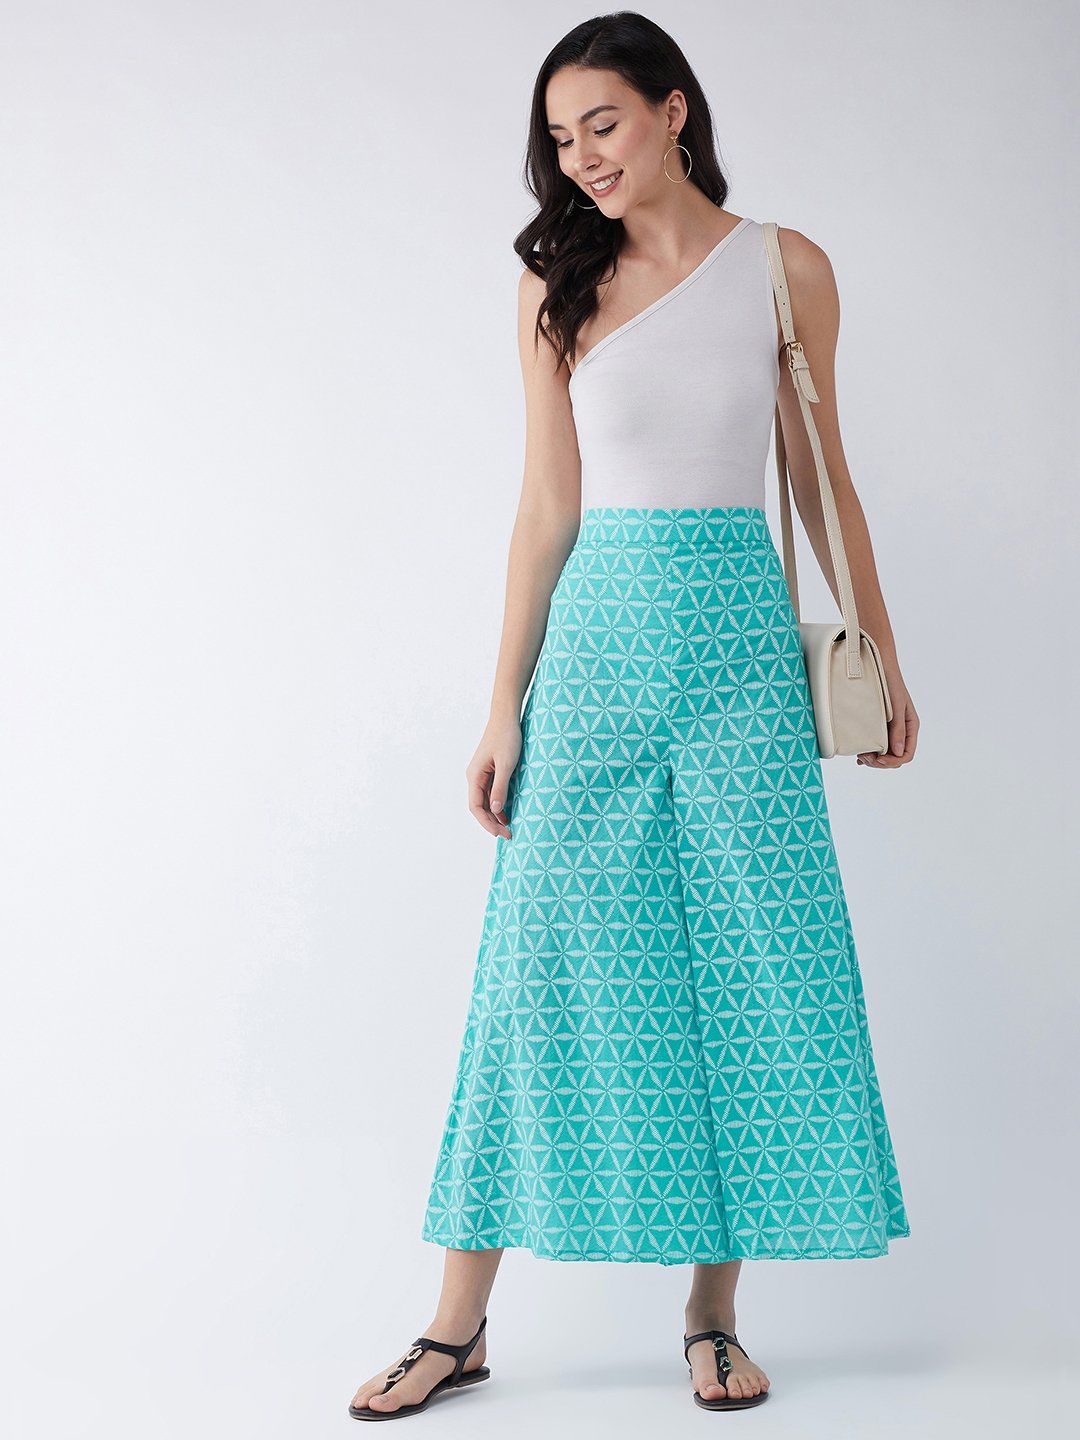 Turquoise Blue Culottes